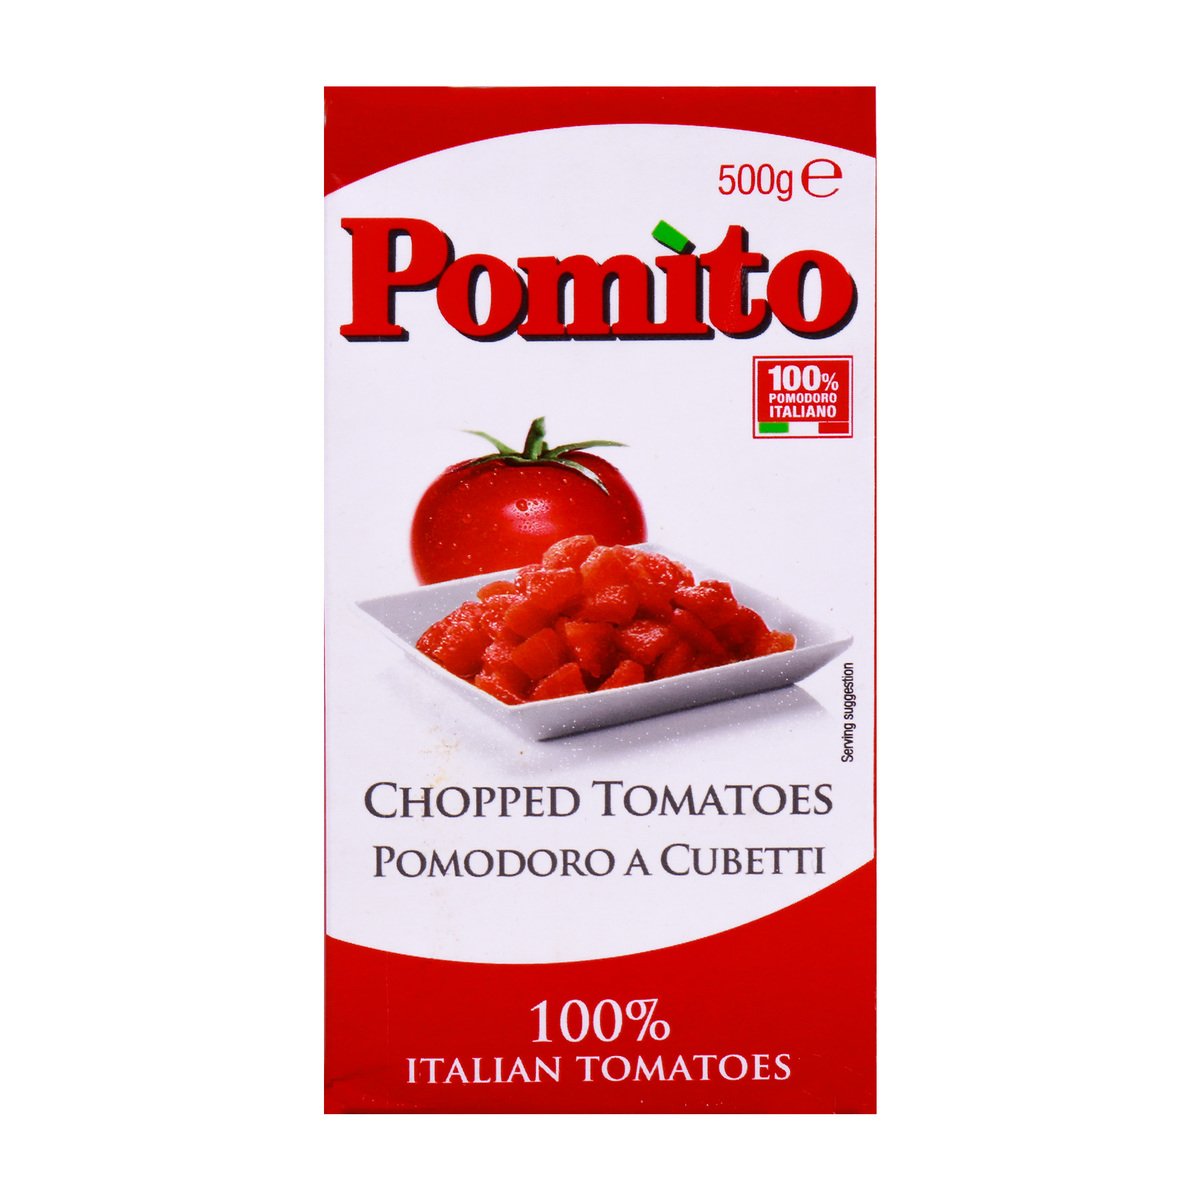 Pomito Chopped Tomatoes 500g